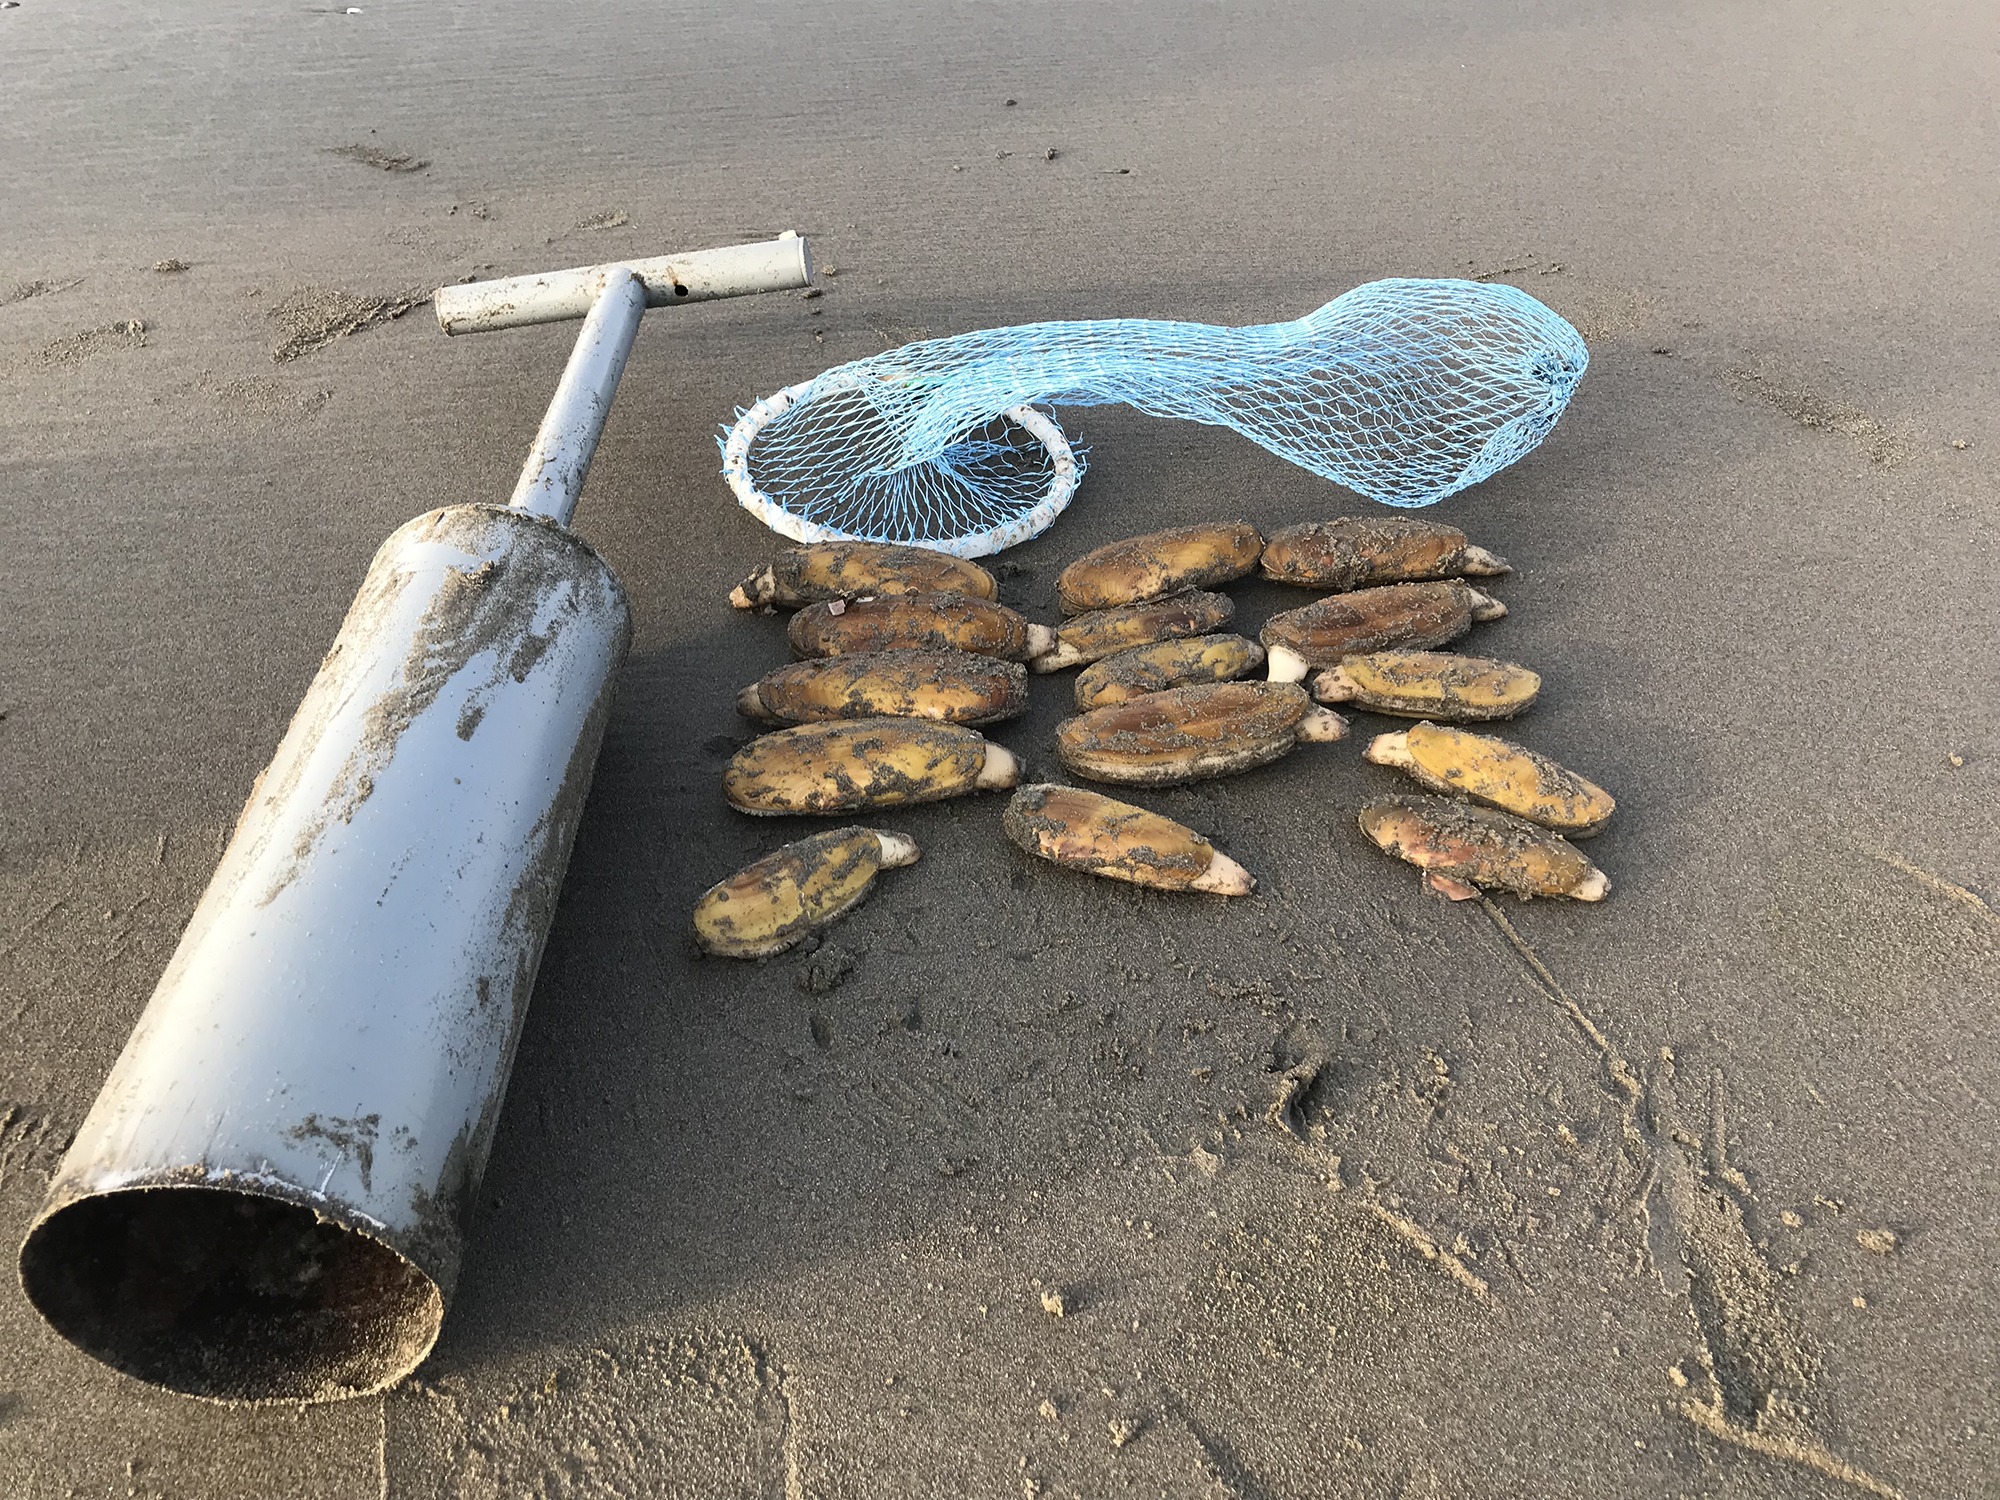 Full limit of 15 razor clams dug south of the Oysterville approach at the northern end of Long Beach Peninsula.